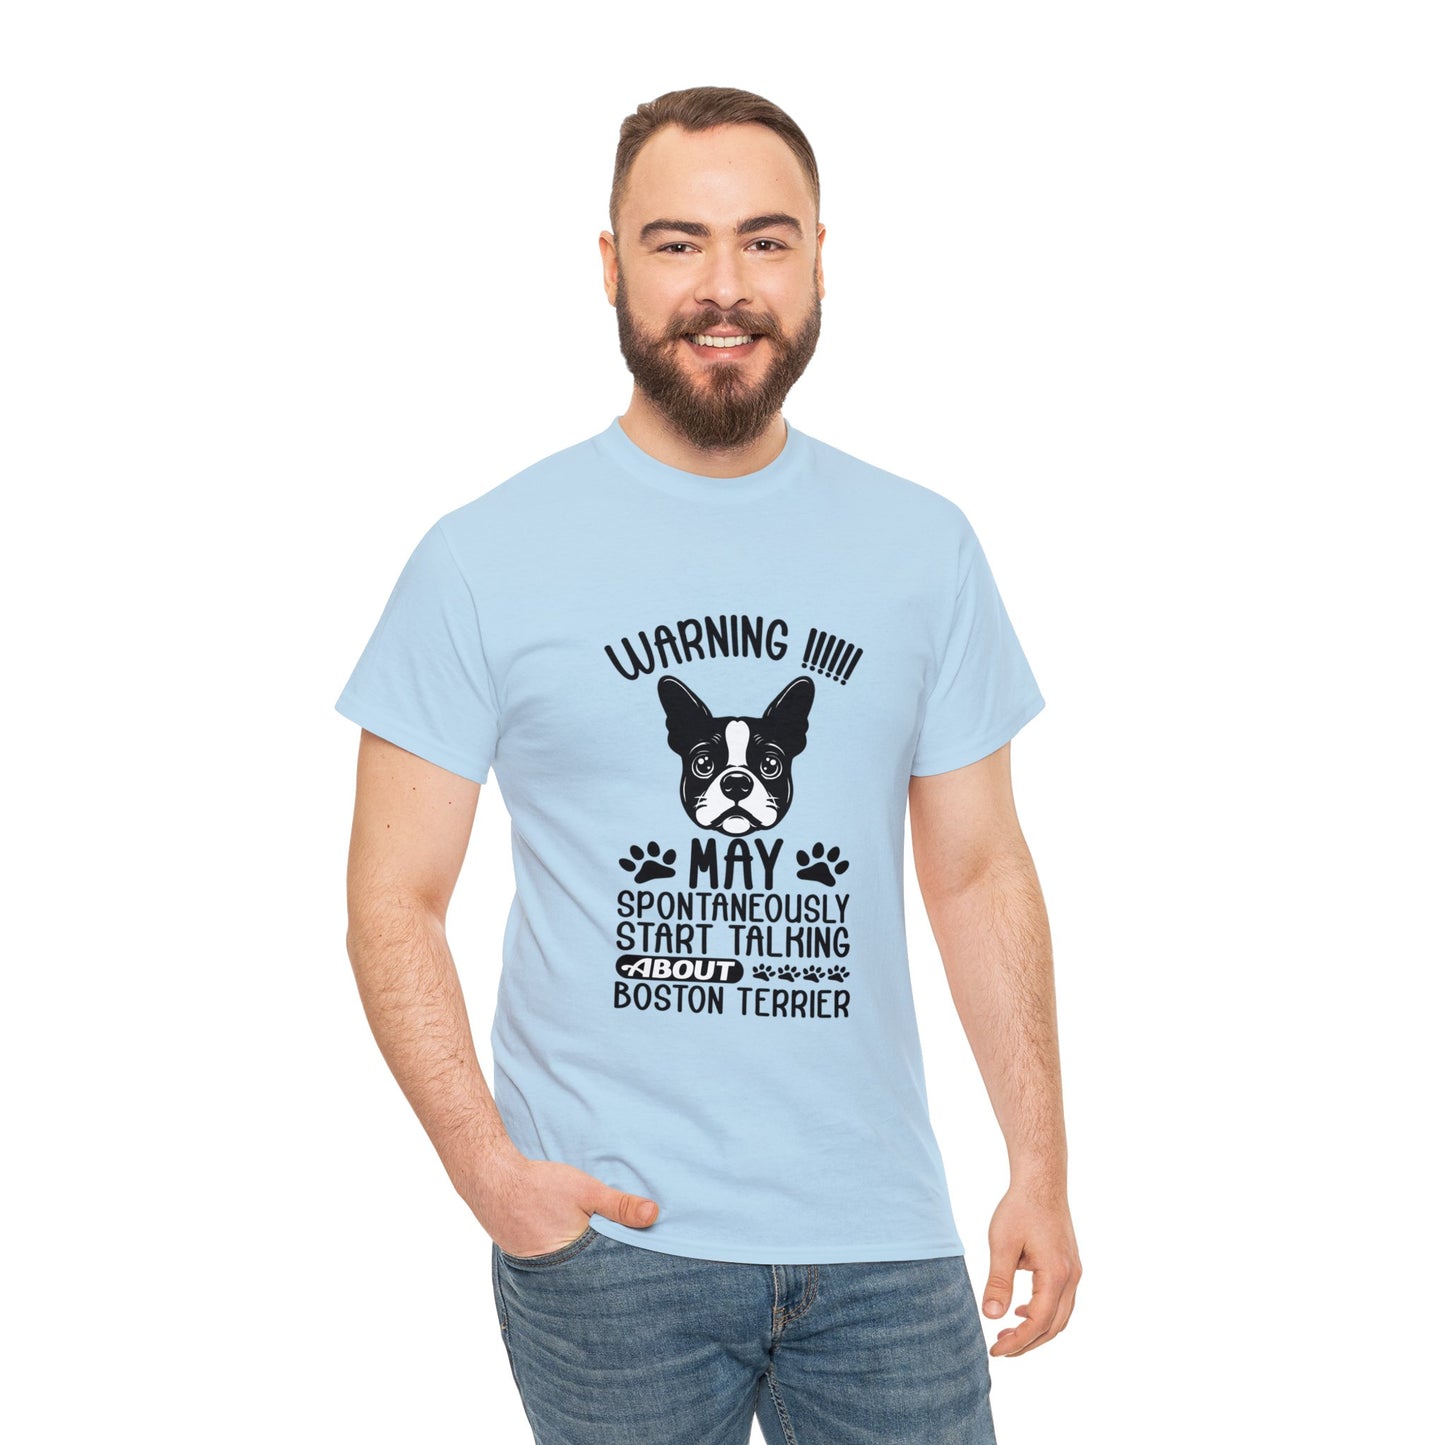 Abby  - Unisex Tshirts for Boston Terrier Lovers